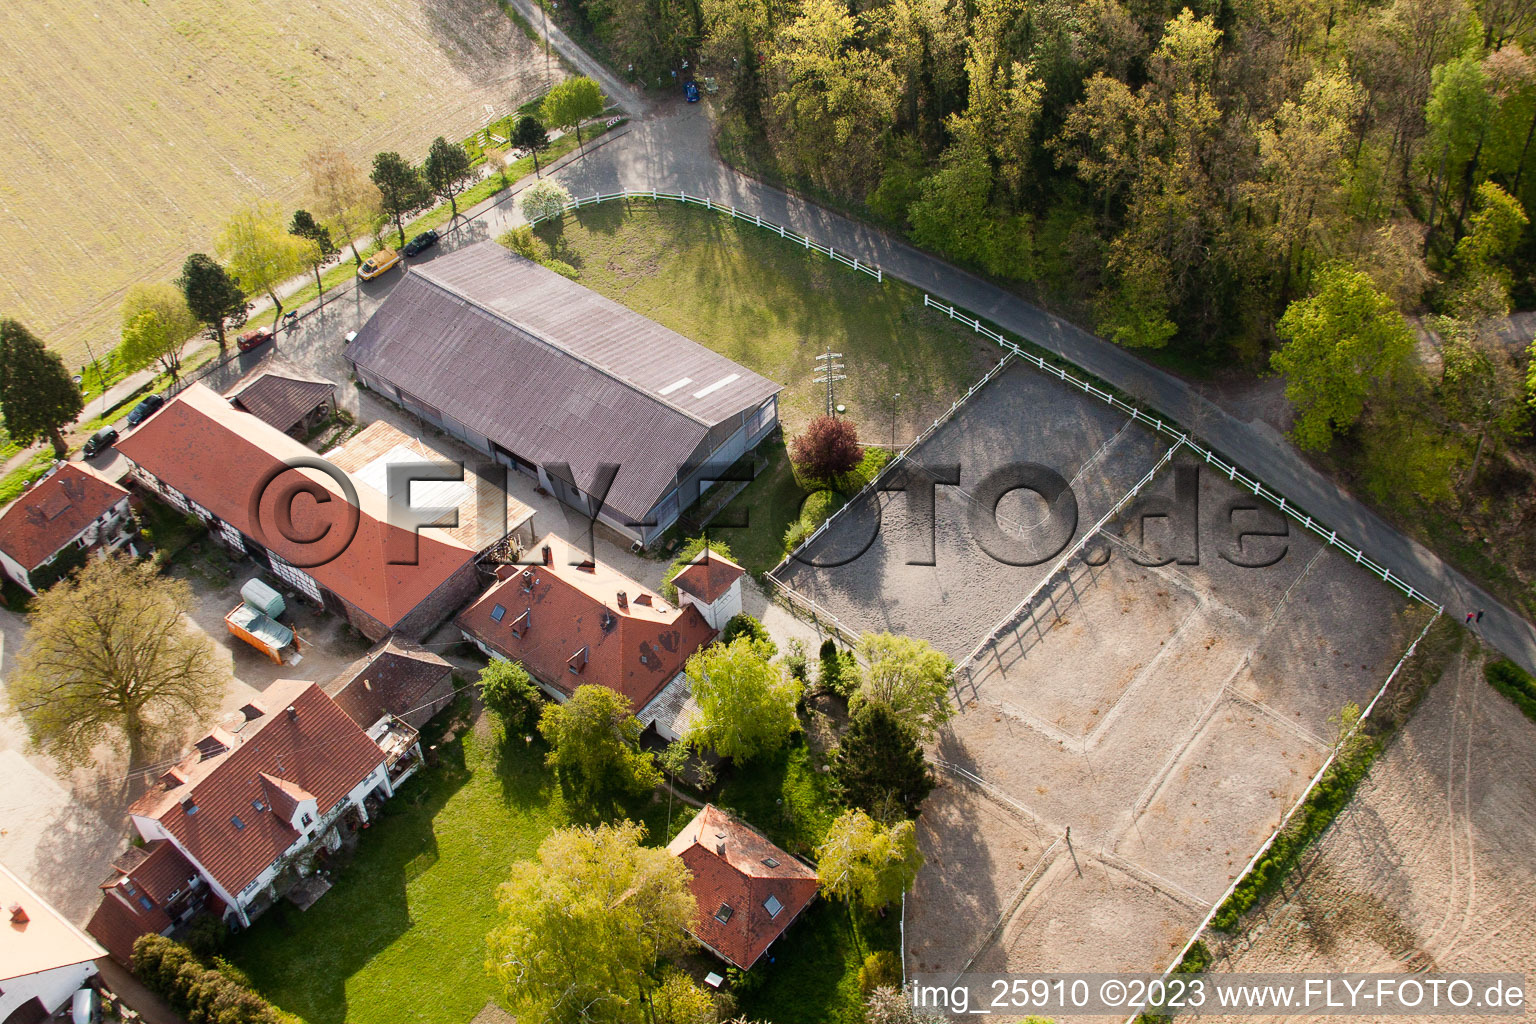 Drone image of Rittnerthof in the district Durlach in Karlsruhe in the state Baden-Wuerttemberg, Germany